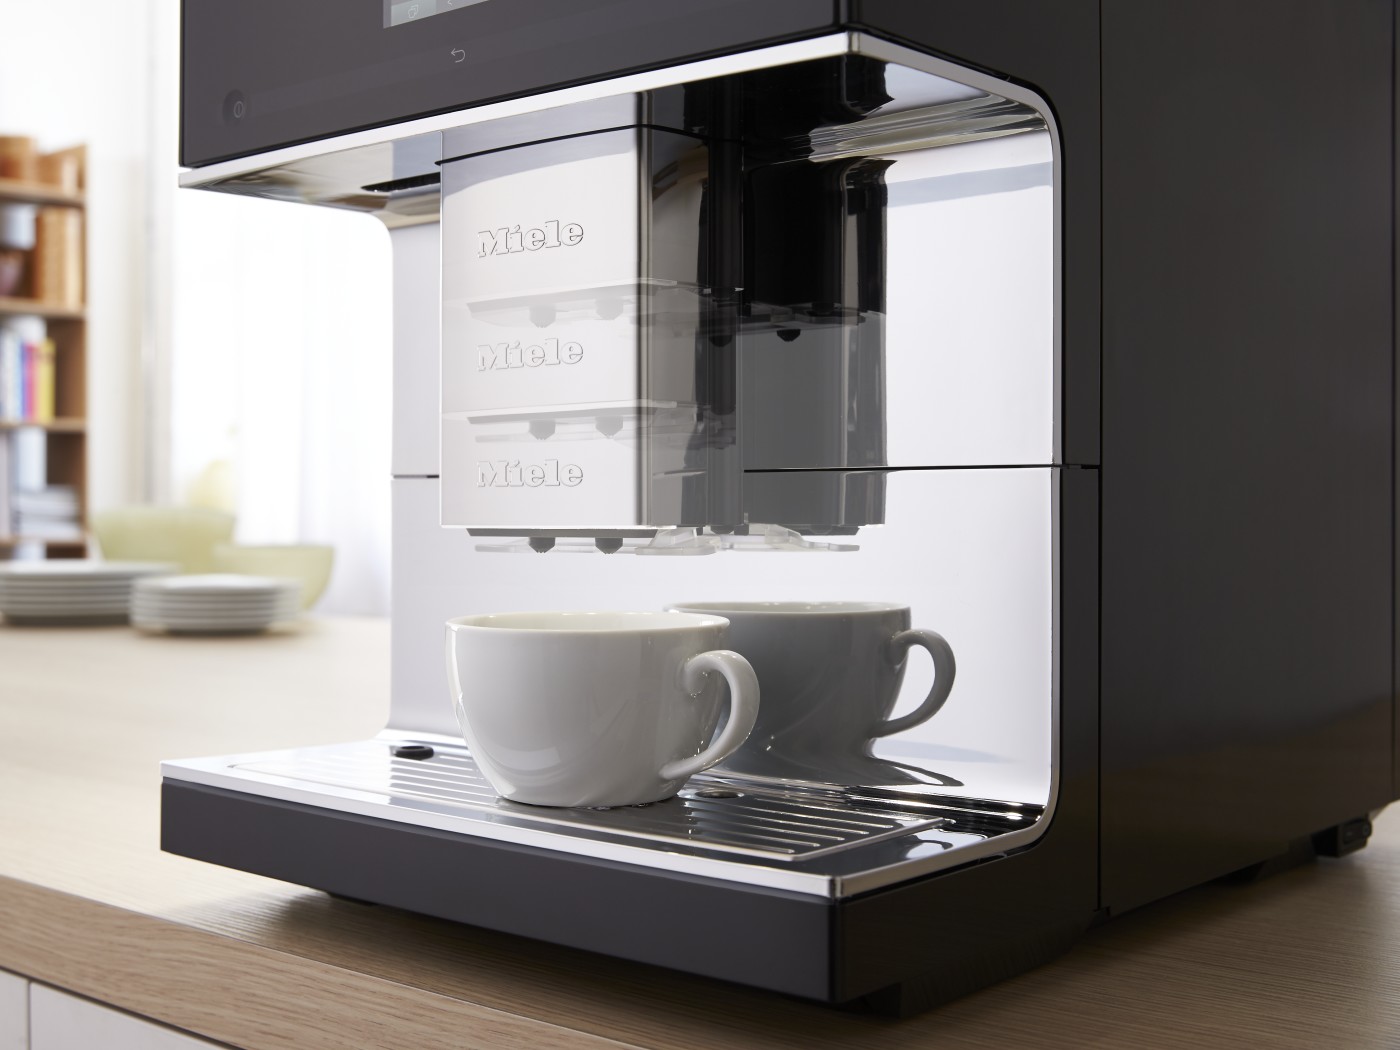 /i/products/Product Category Page/Coffee Machines/Freestanding/CupSensor.jpg